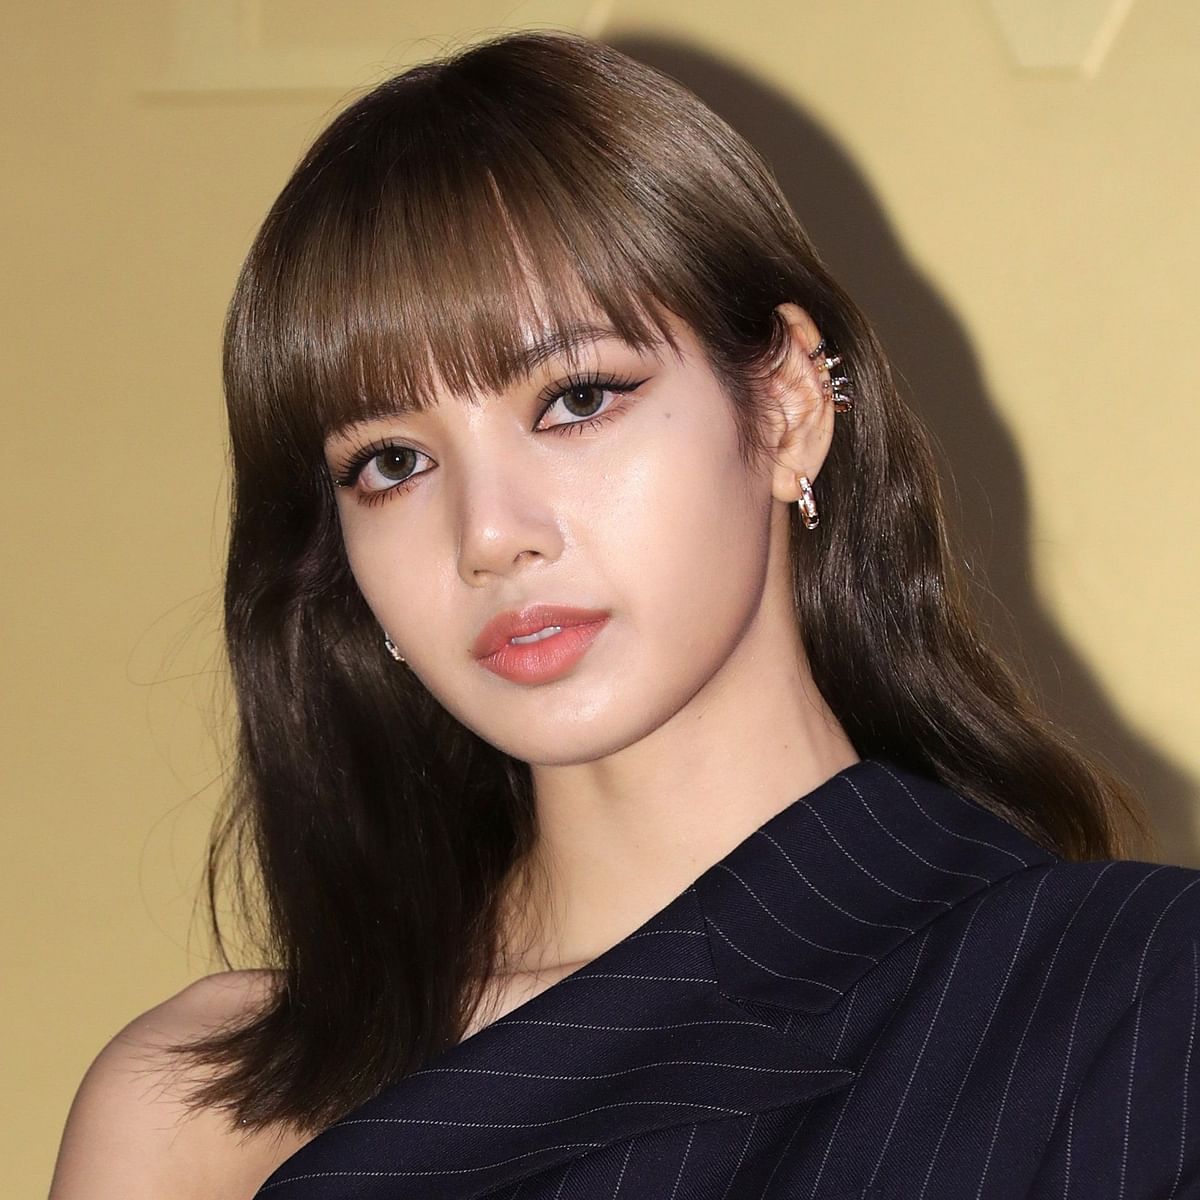 Top 5 interesting facts about BLACKPINK's Lisa